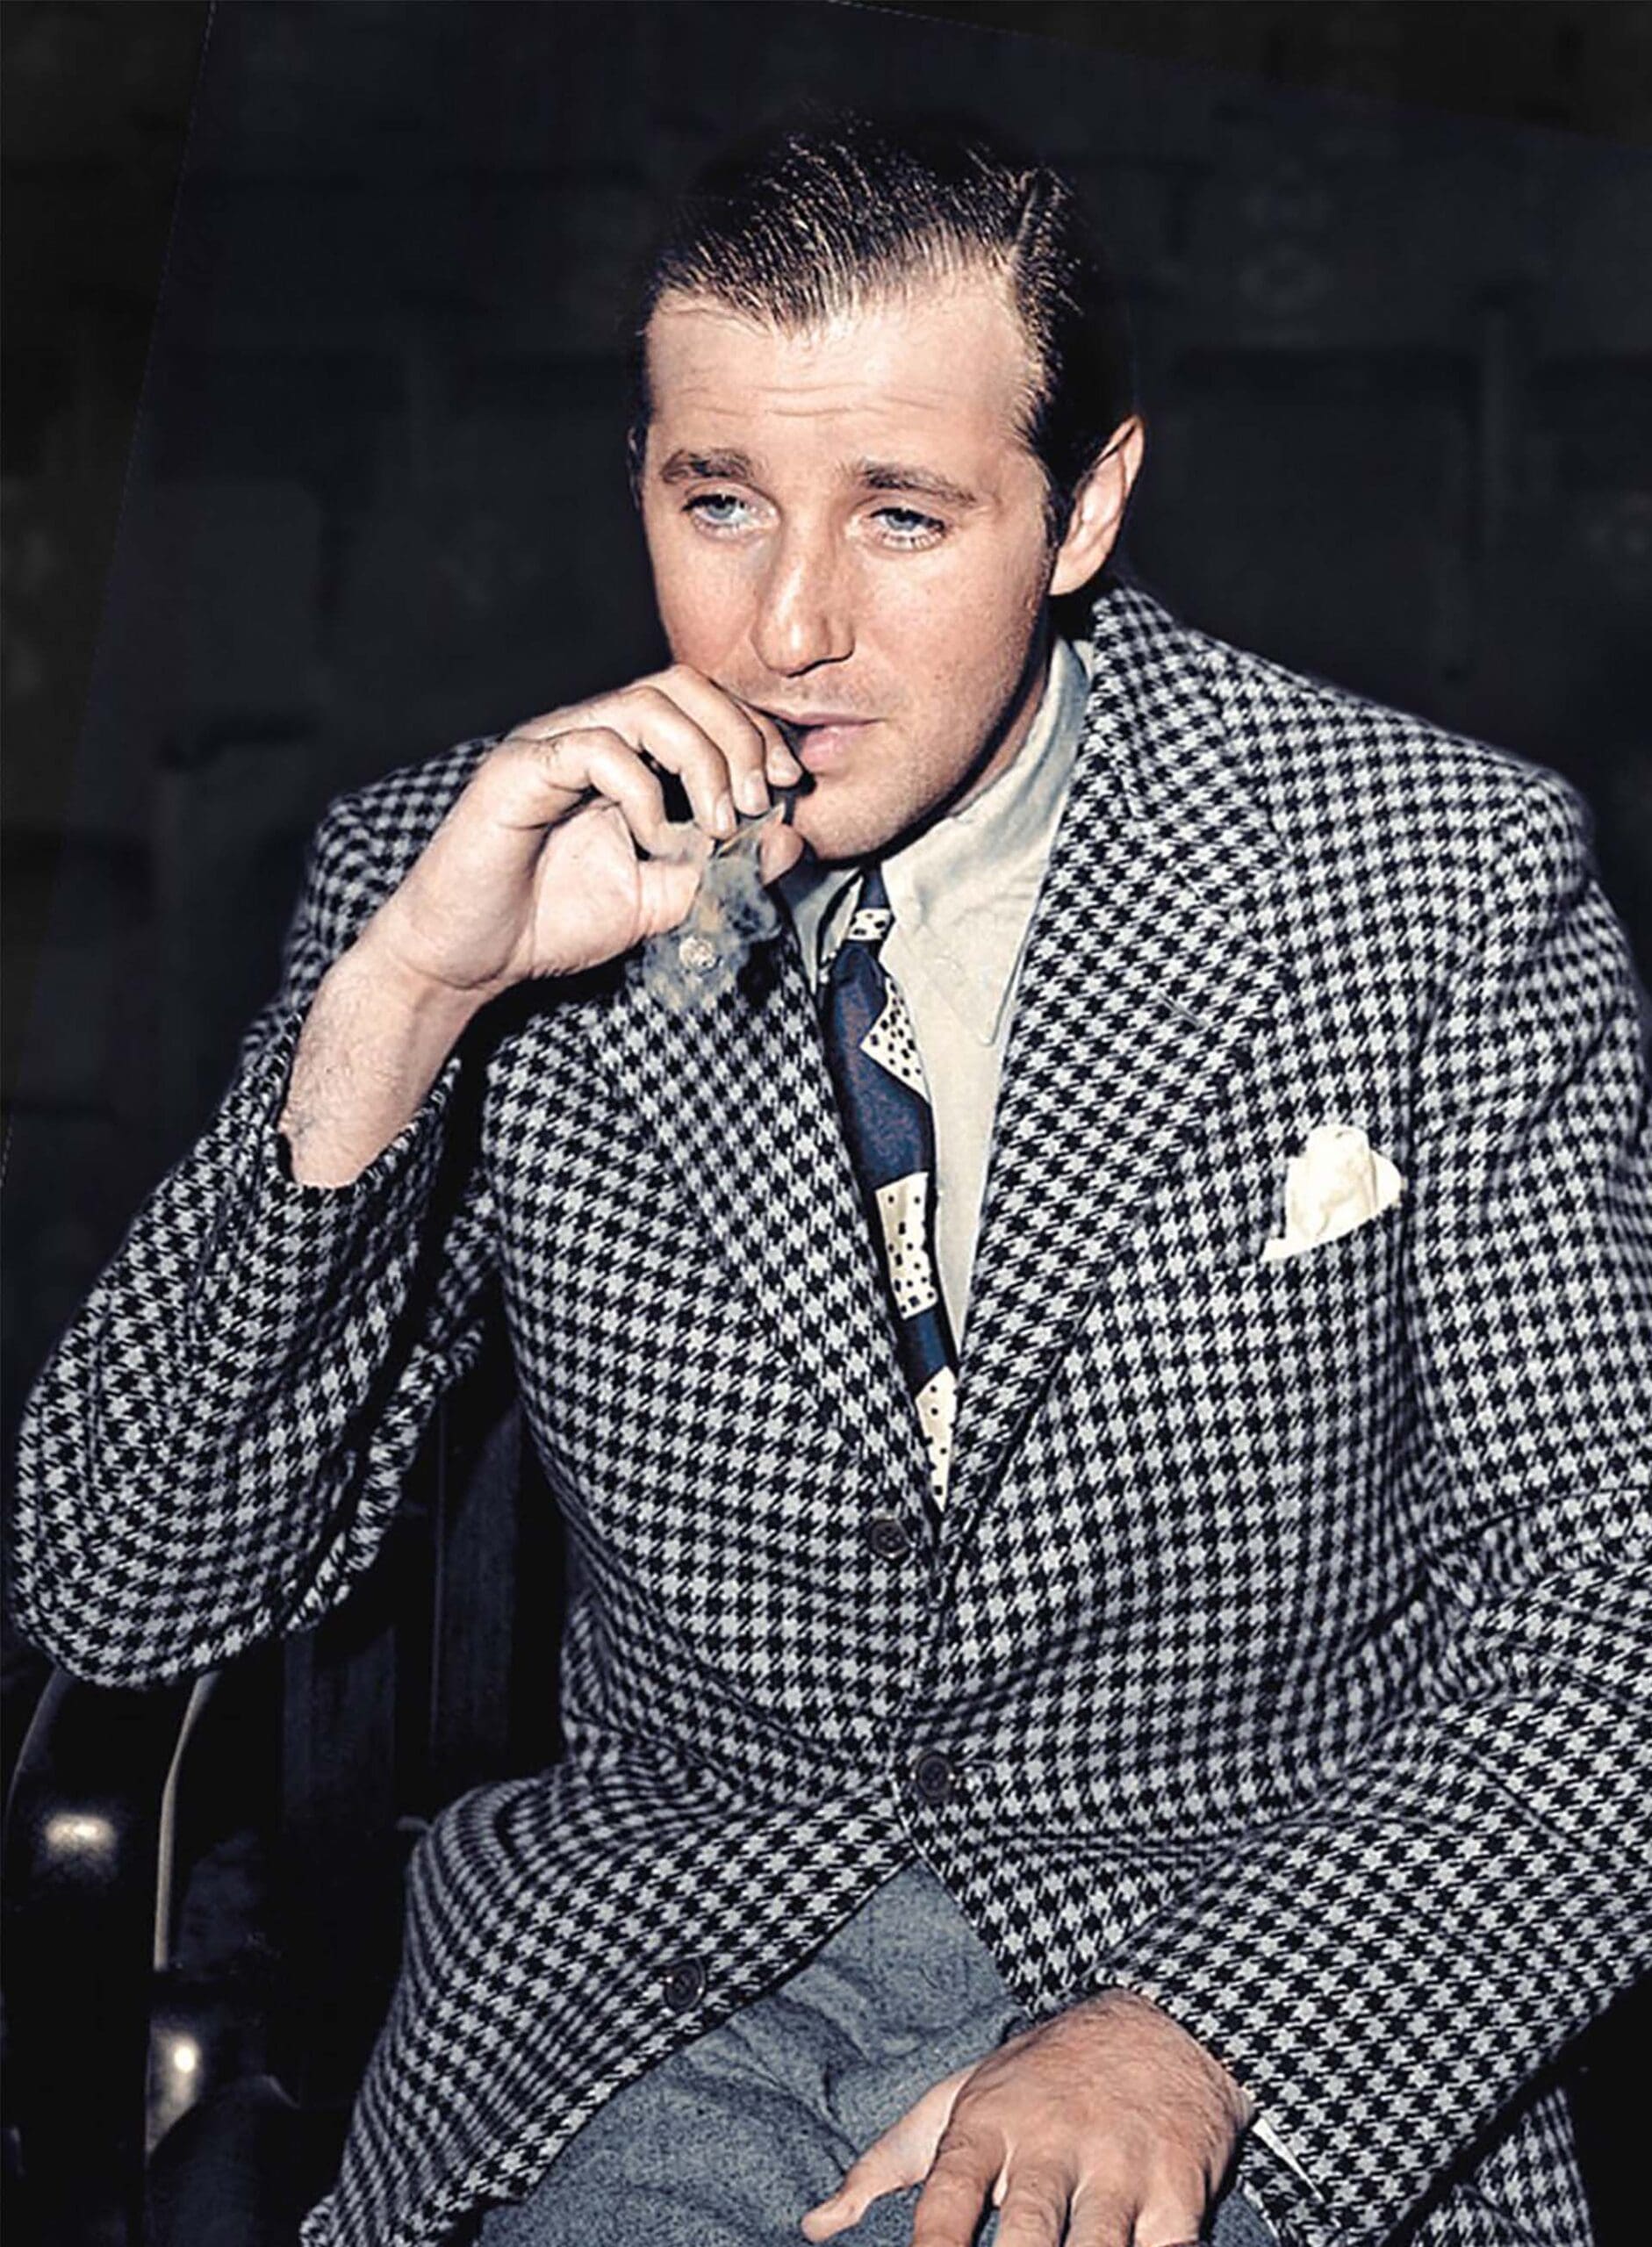 Bugsy Siegel - The Rise and Fall of the Most Famous Criminals in History